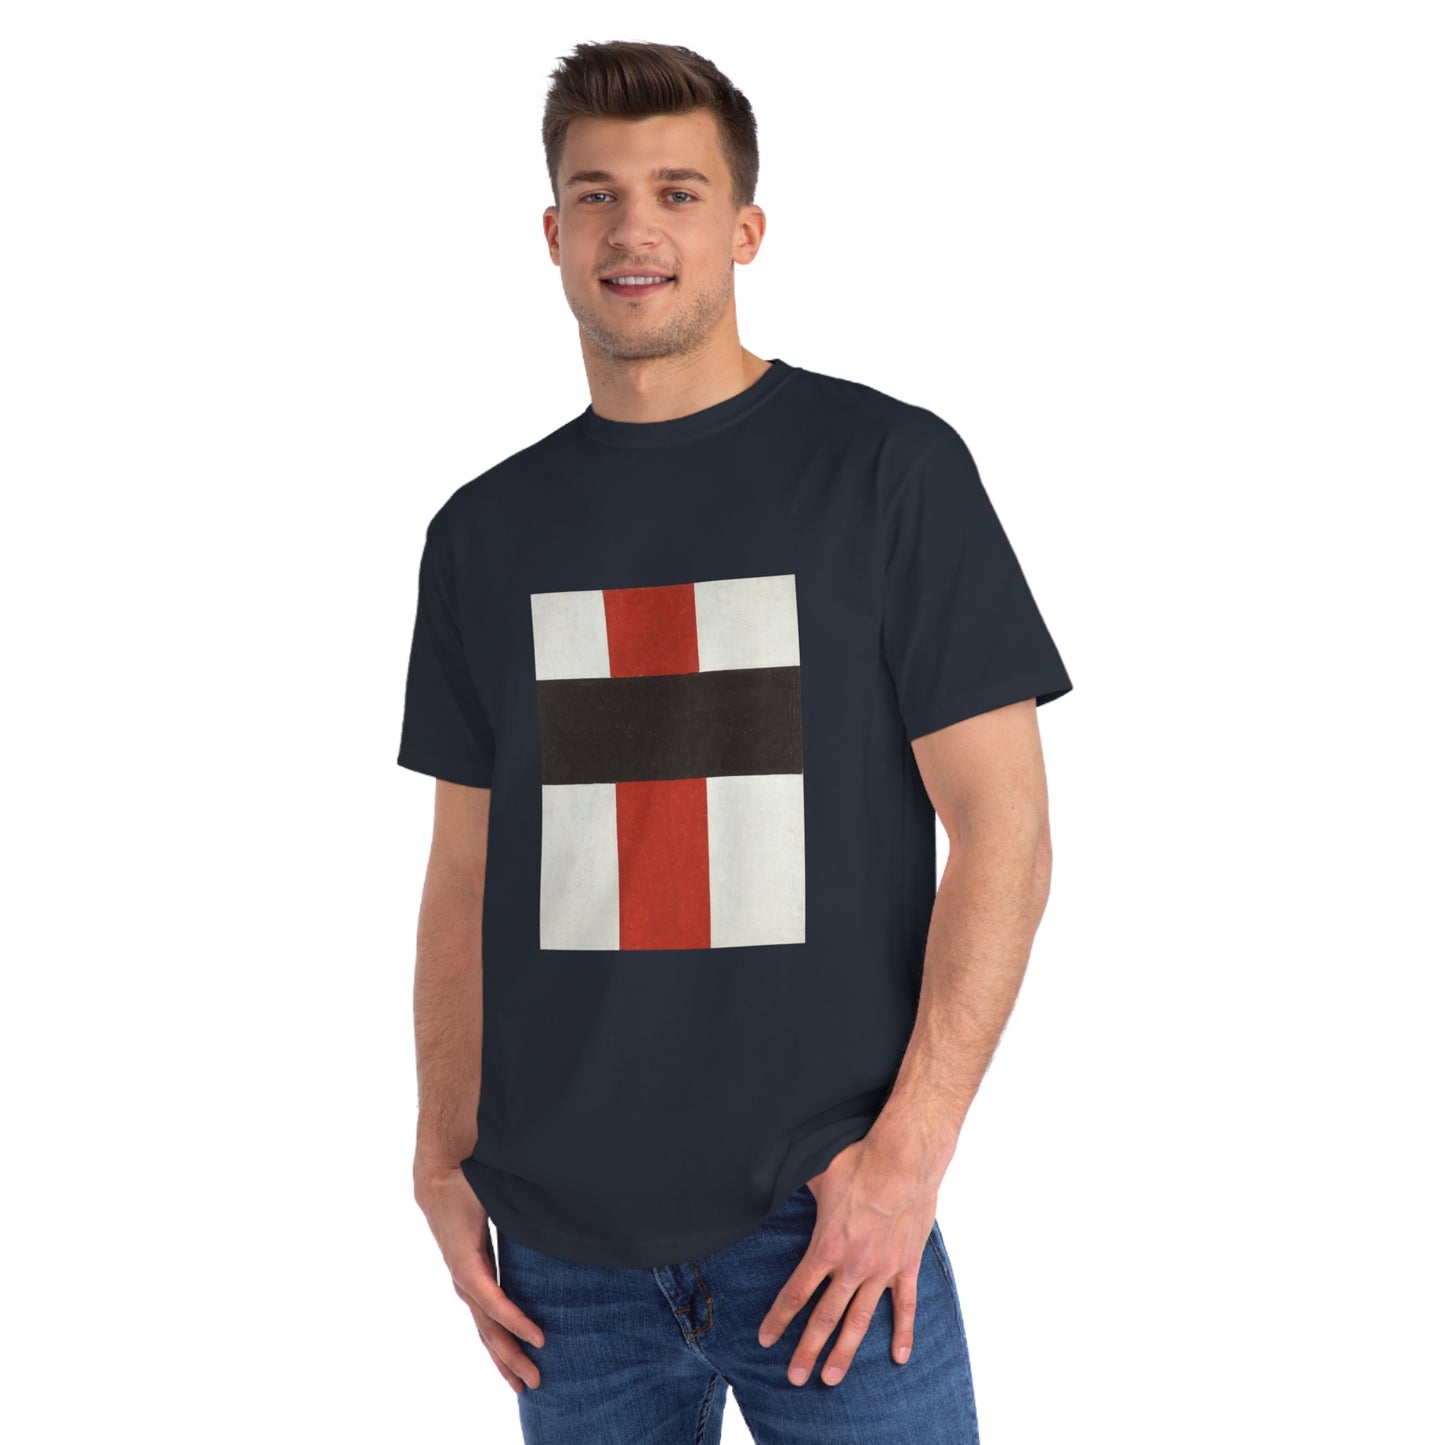 KAZIMIR MALEVICH - LARGE CROSS IN BLACK OVER RED ON WHITE - ORGANIC CLASSIC UNISEX T-SHIRT